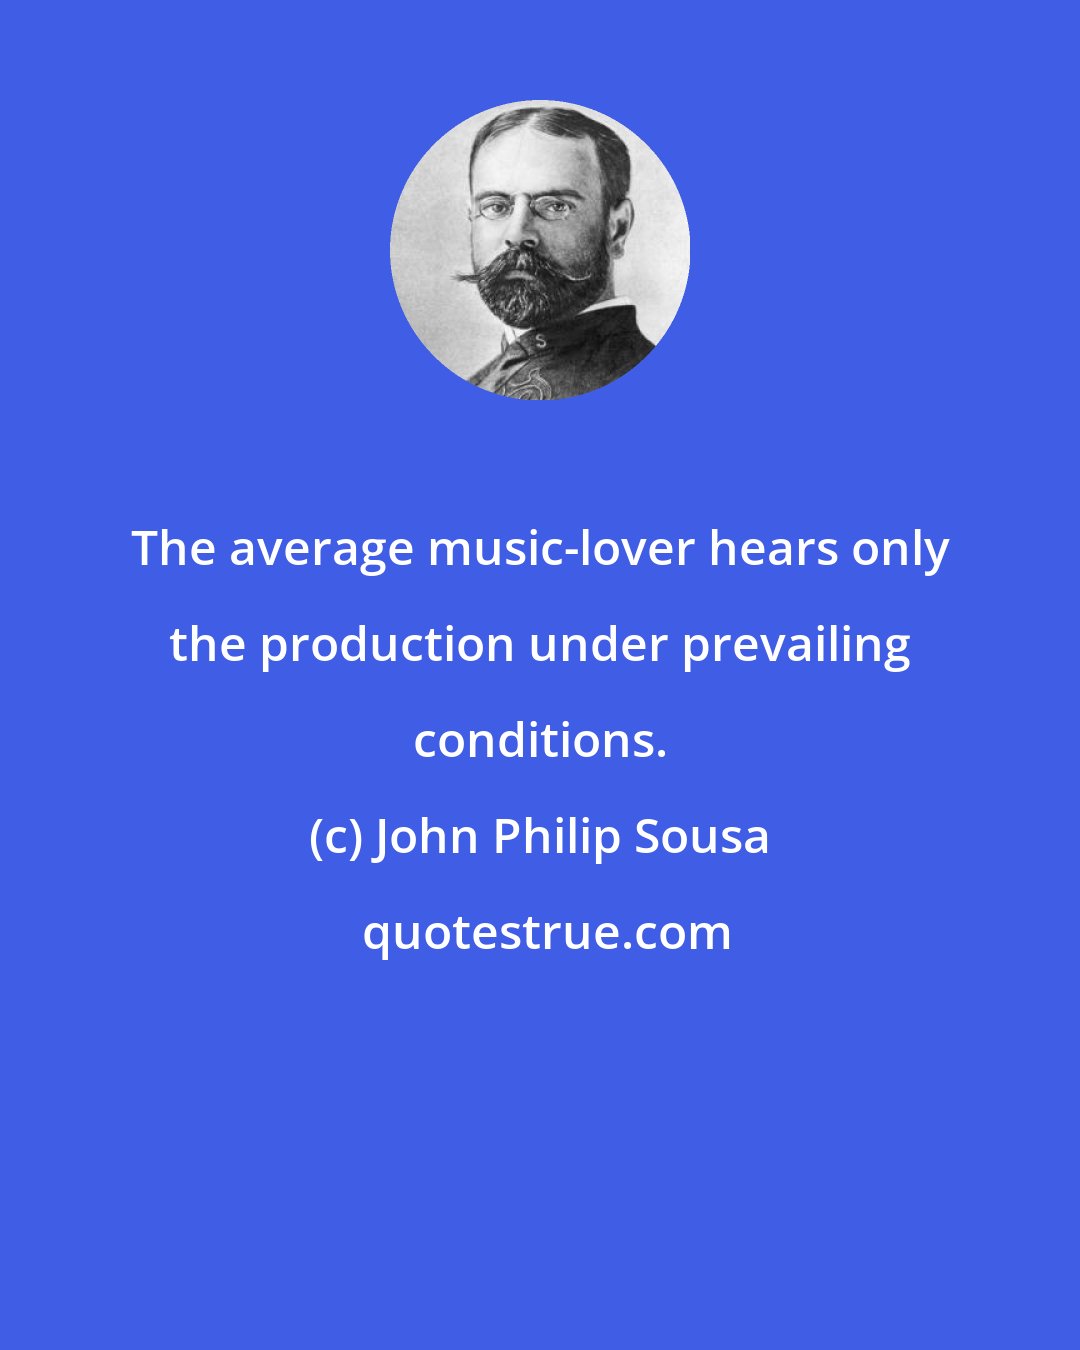 John Philip Sousa: The average music-lover hears only the production under prevailing conditions.